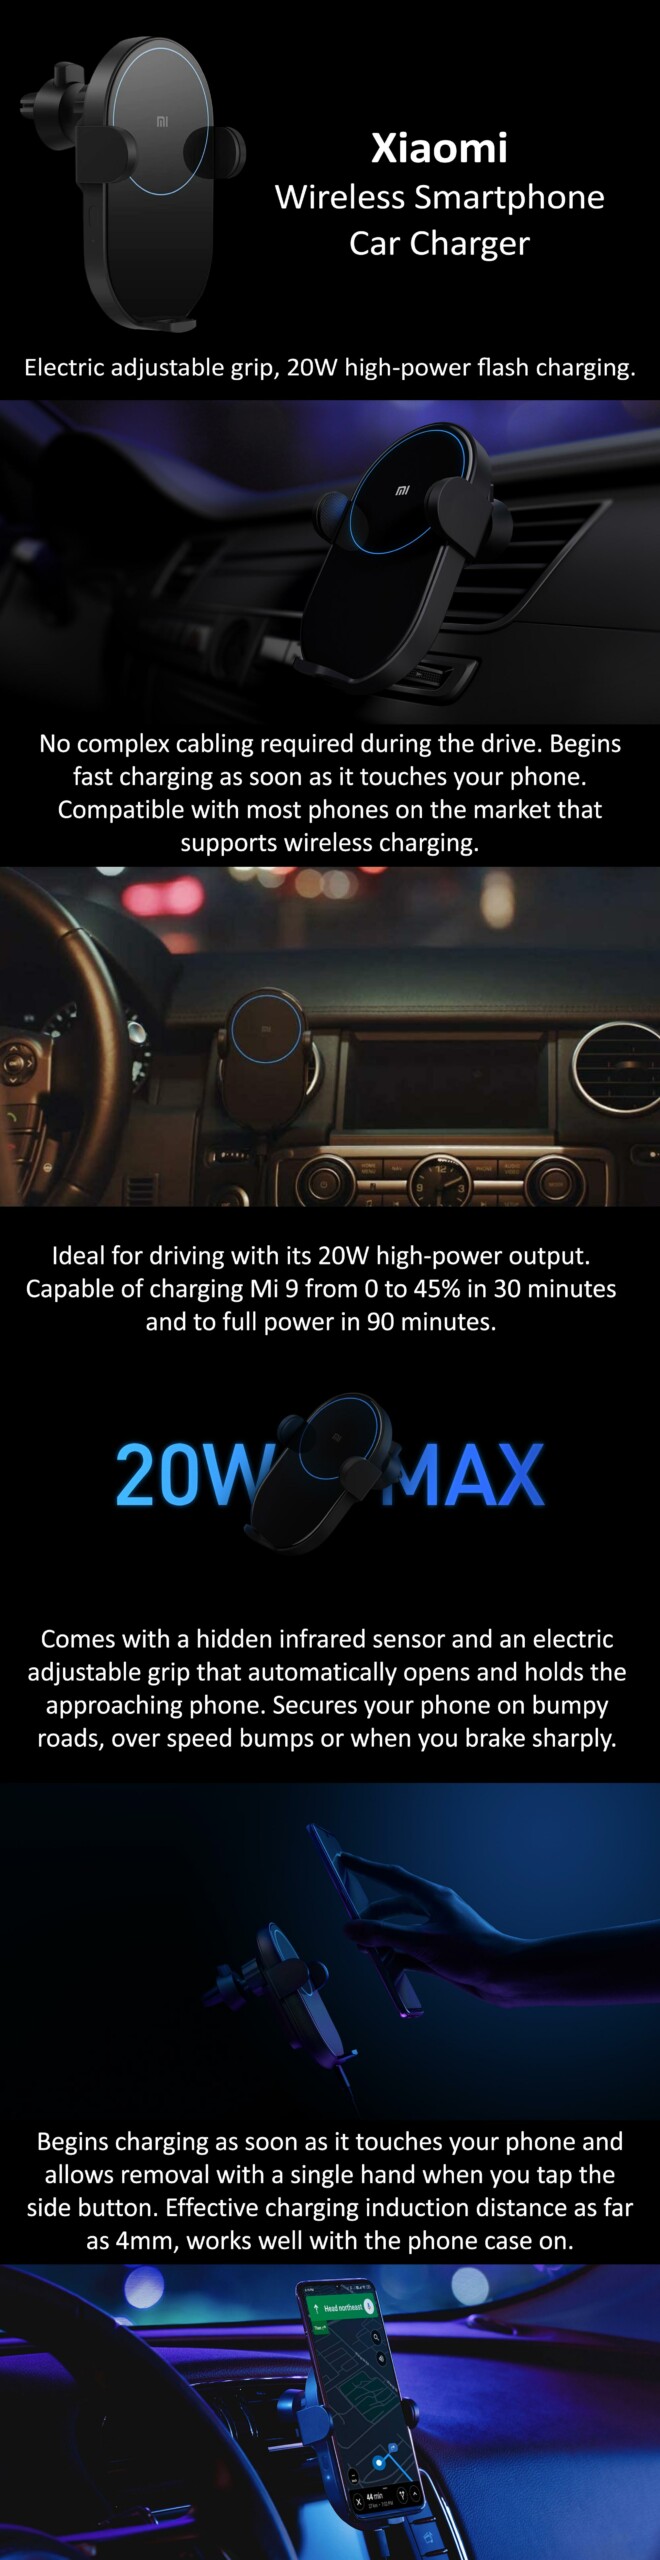 Xiaomi Mi Wireless Car Charger - 20W Fast Charging, Automatic Opening Arm, Dual Cooling System, 2.5D Glass with Blue Ring Light